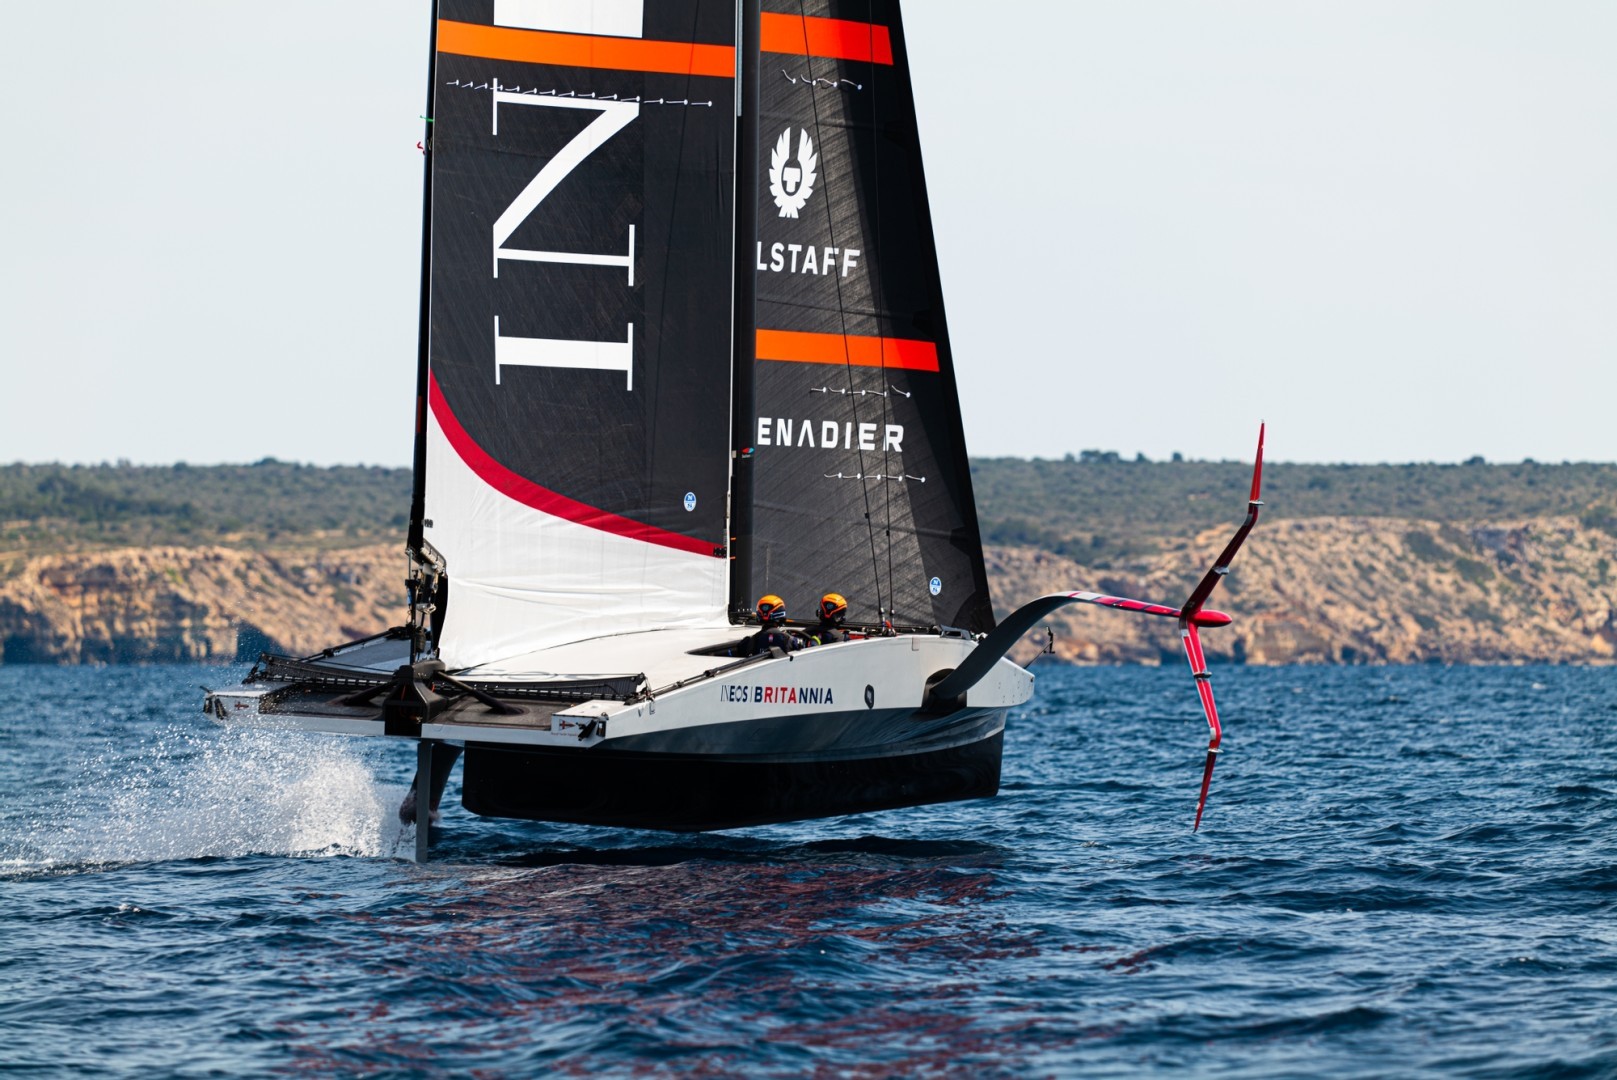 America's Cup, Ineos Britannia hits targets in Palma